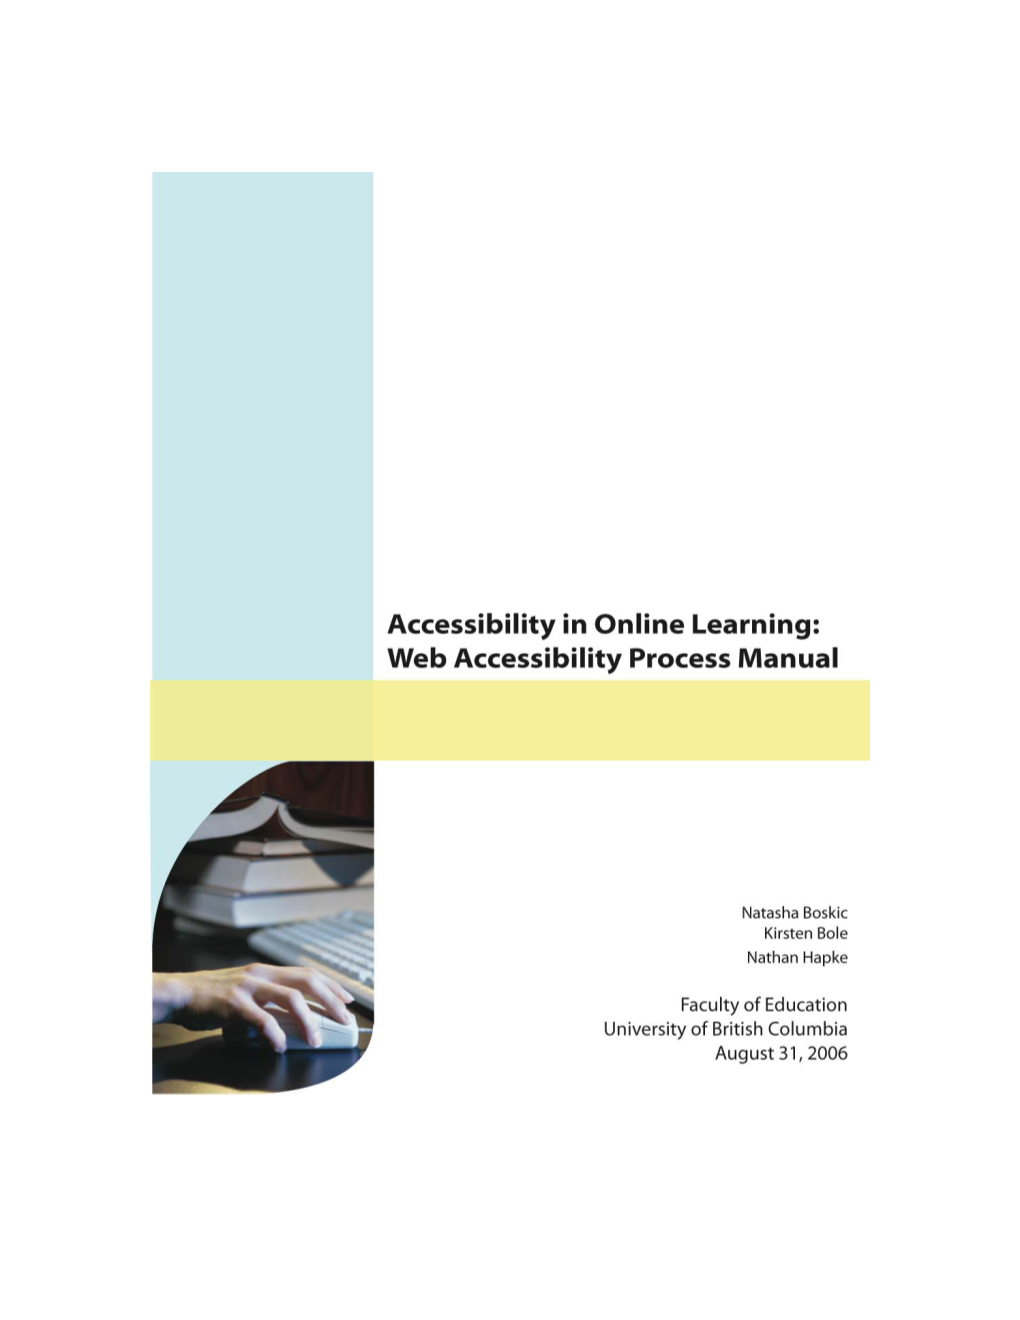 Accessibility in Online Learning: Web Accessibility Process Manual